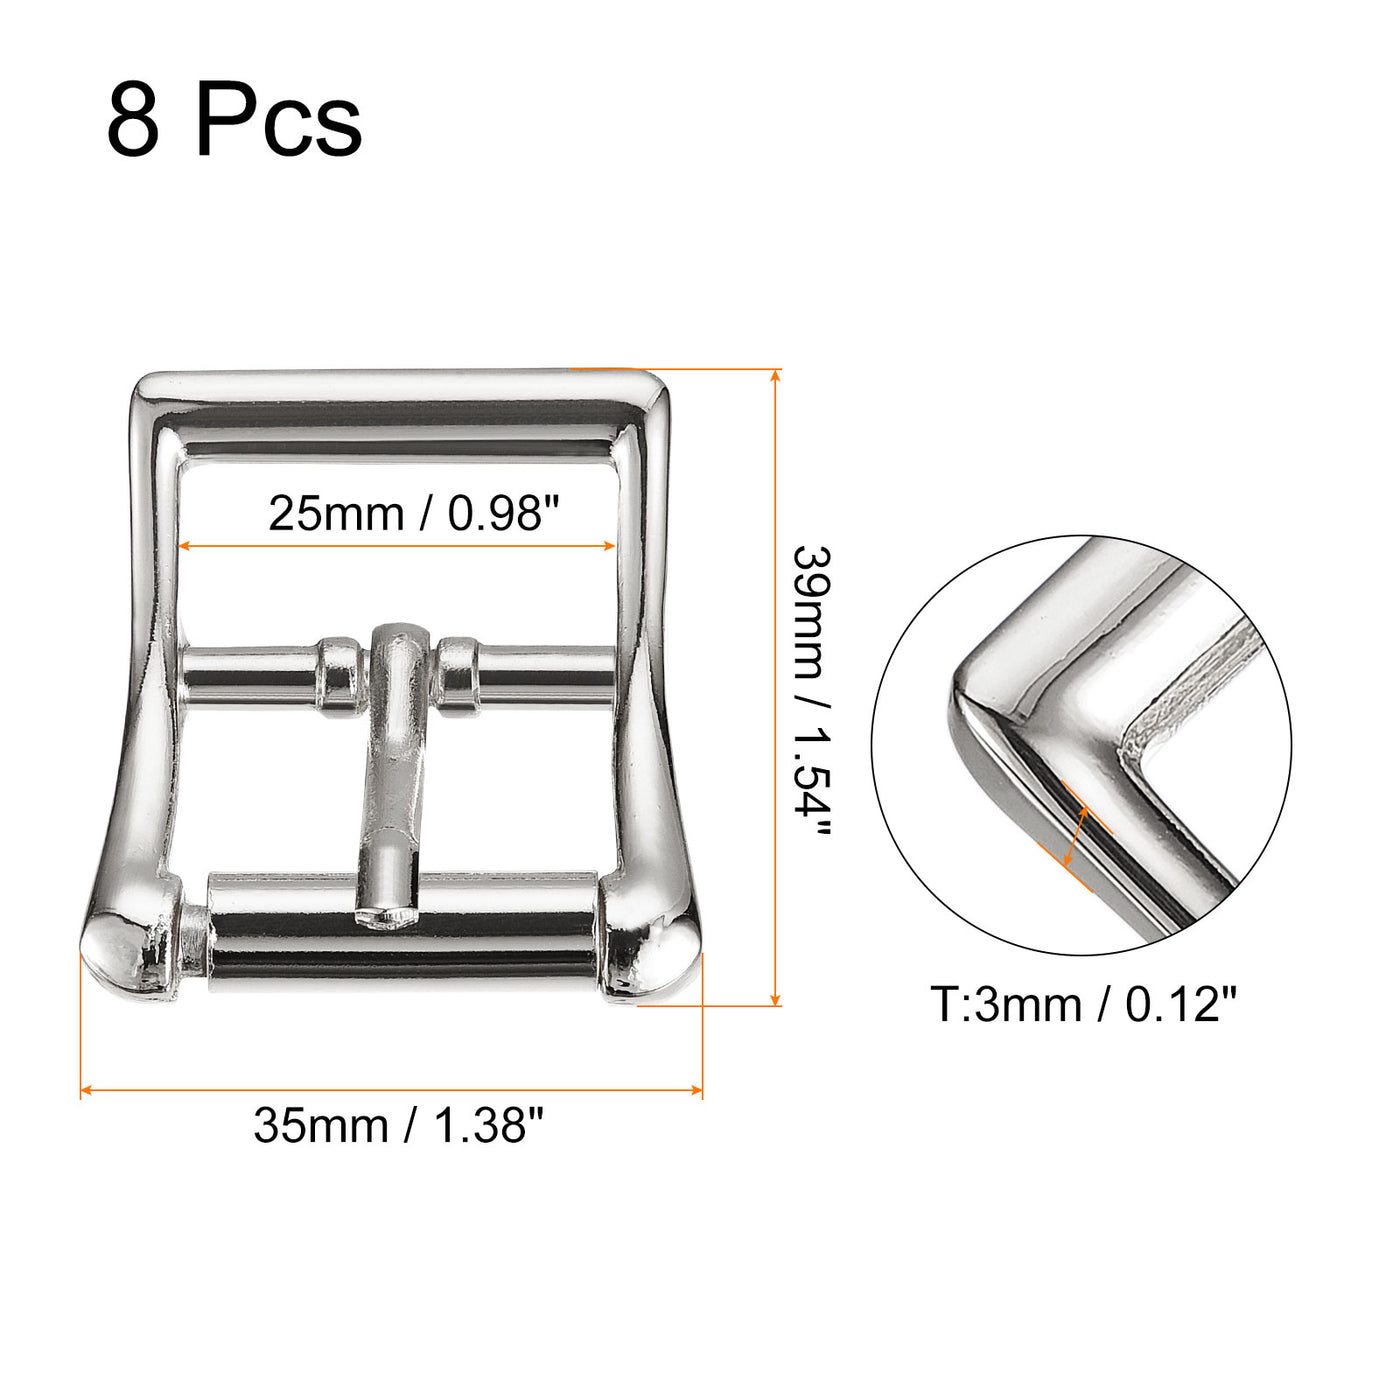 uxcell Uxcell 8Pcs 0.98" Single Prong Belt Buckle Square Center Bar Buckles for Belt, Silver